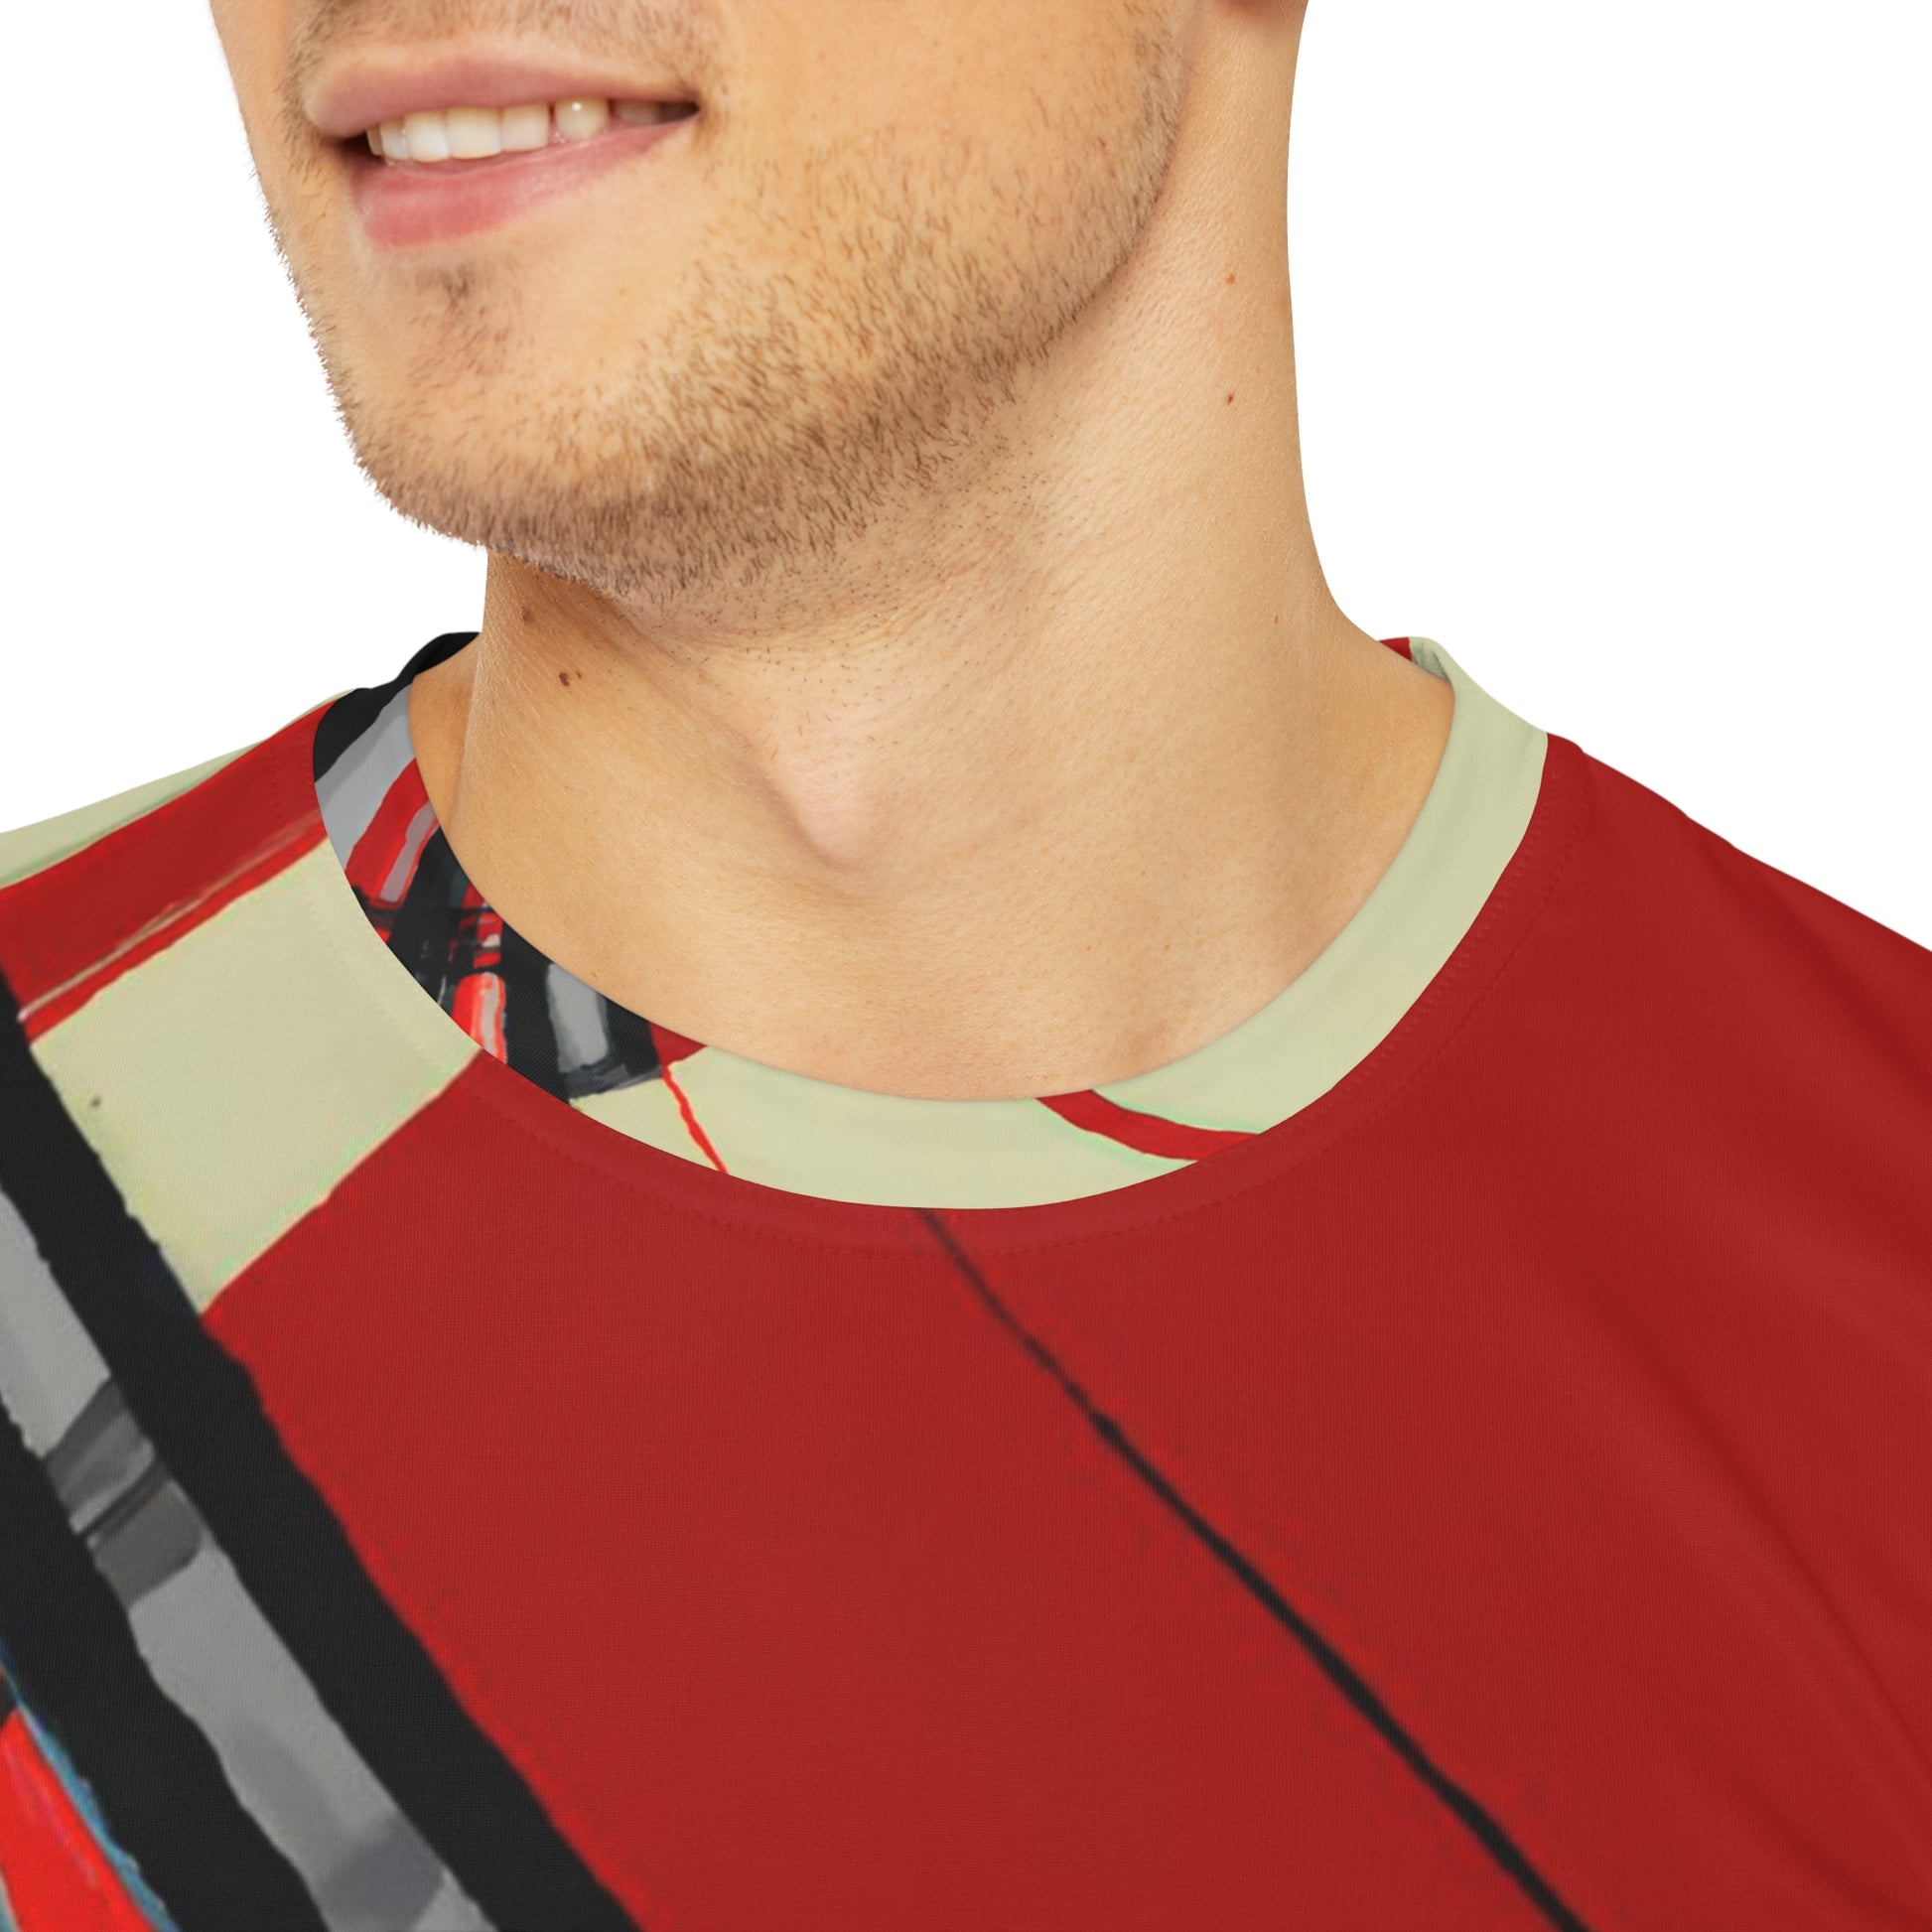 Close-up shot of  the Highland Lancer Veil Crewneck Pullover All-Over Print Short-Sleeved Shirt red black gray beige plaid pattern worn by a white man